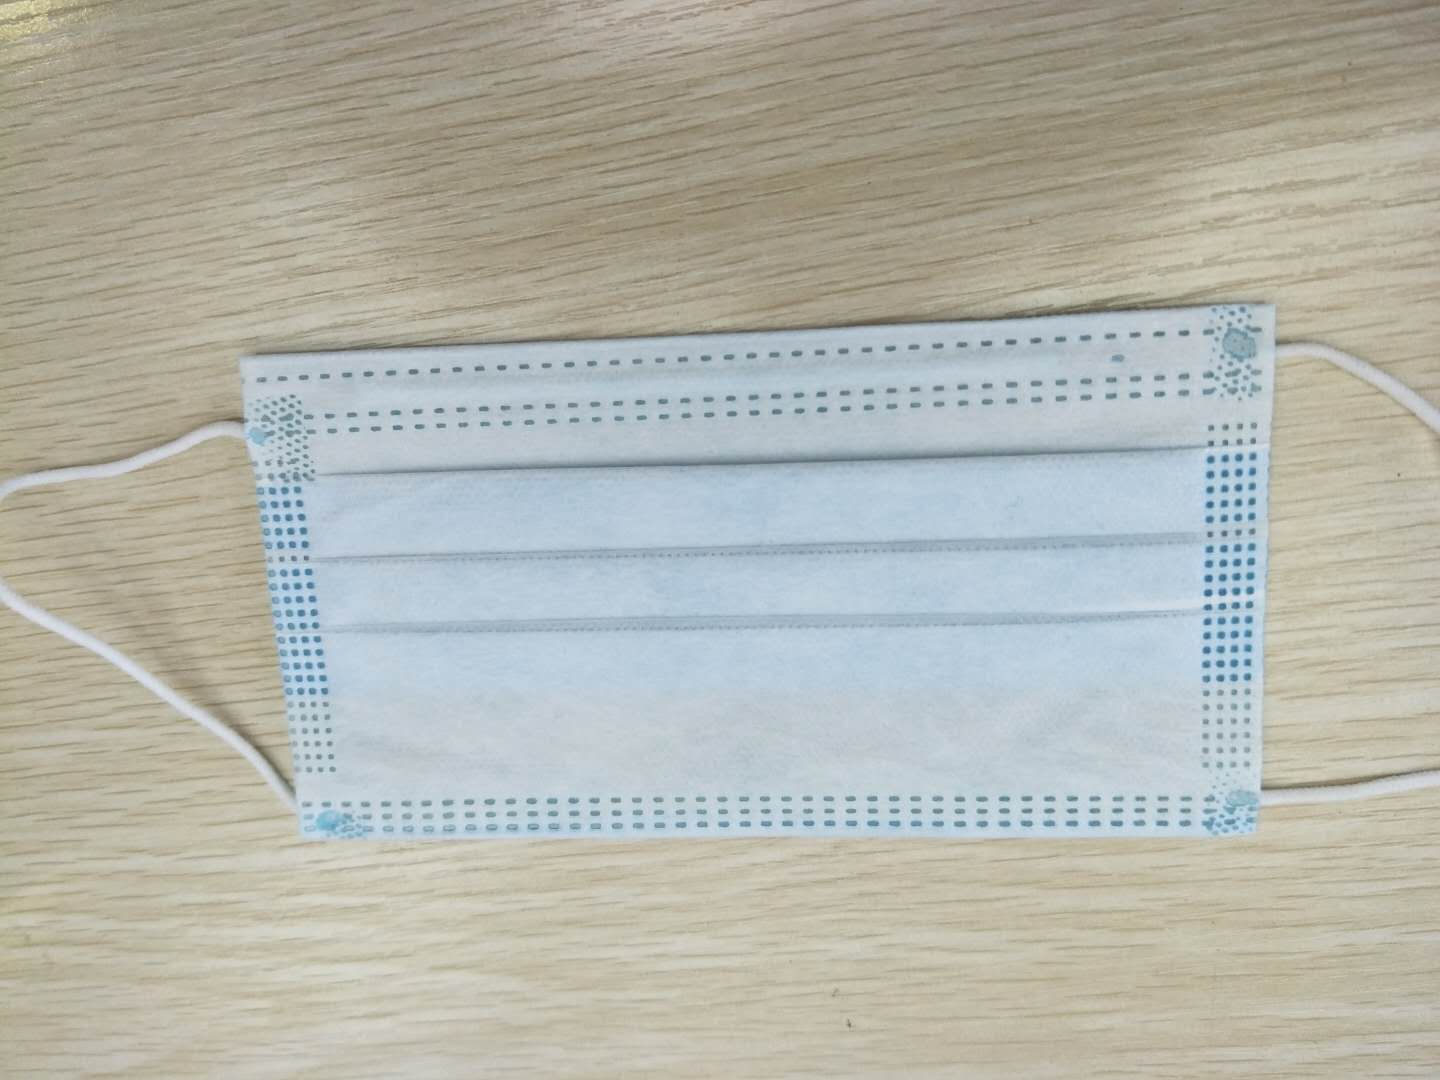 Wholesale of disposable mask manufacturers